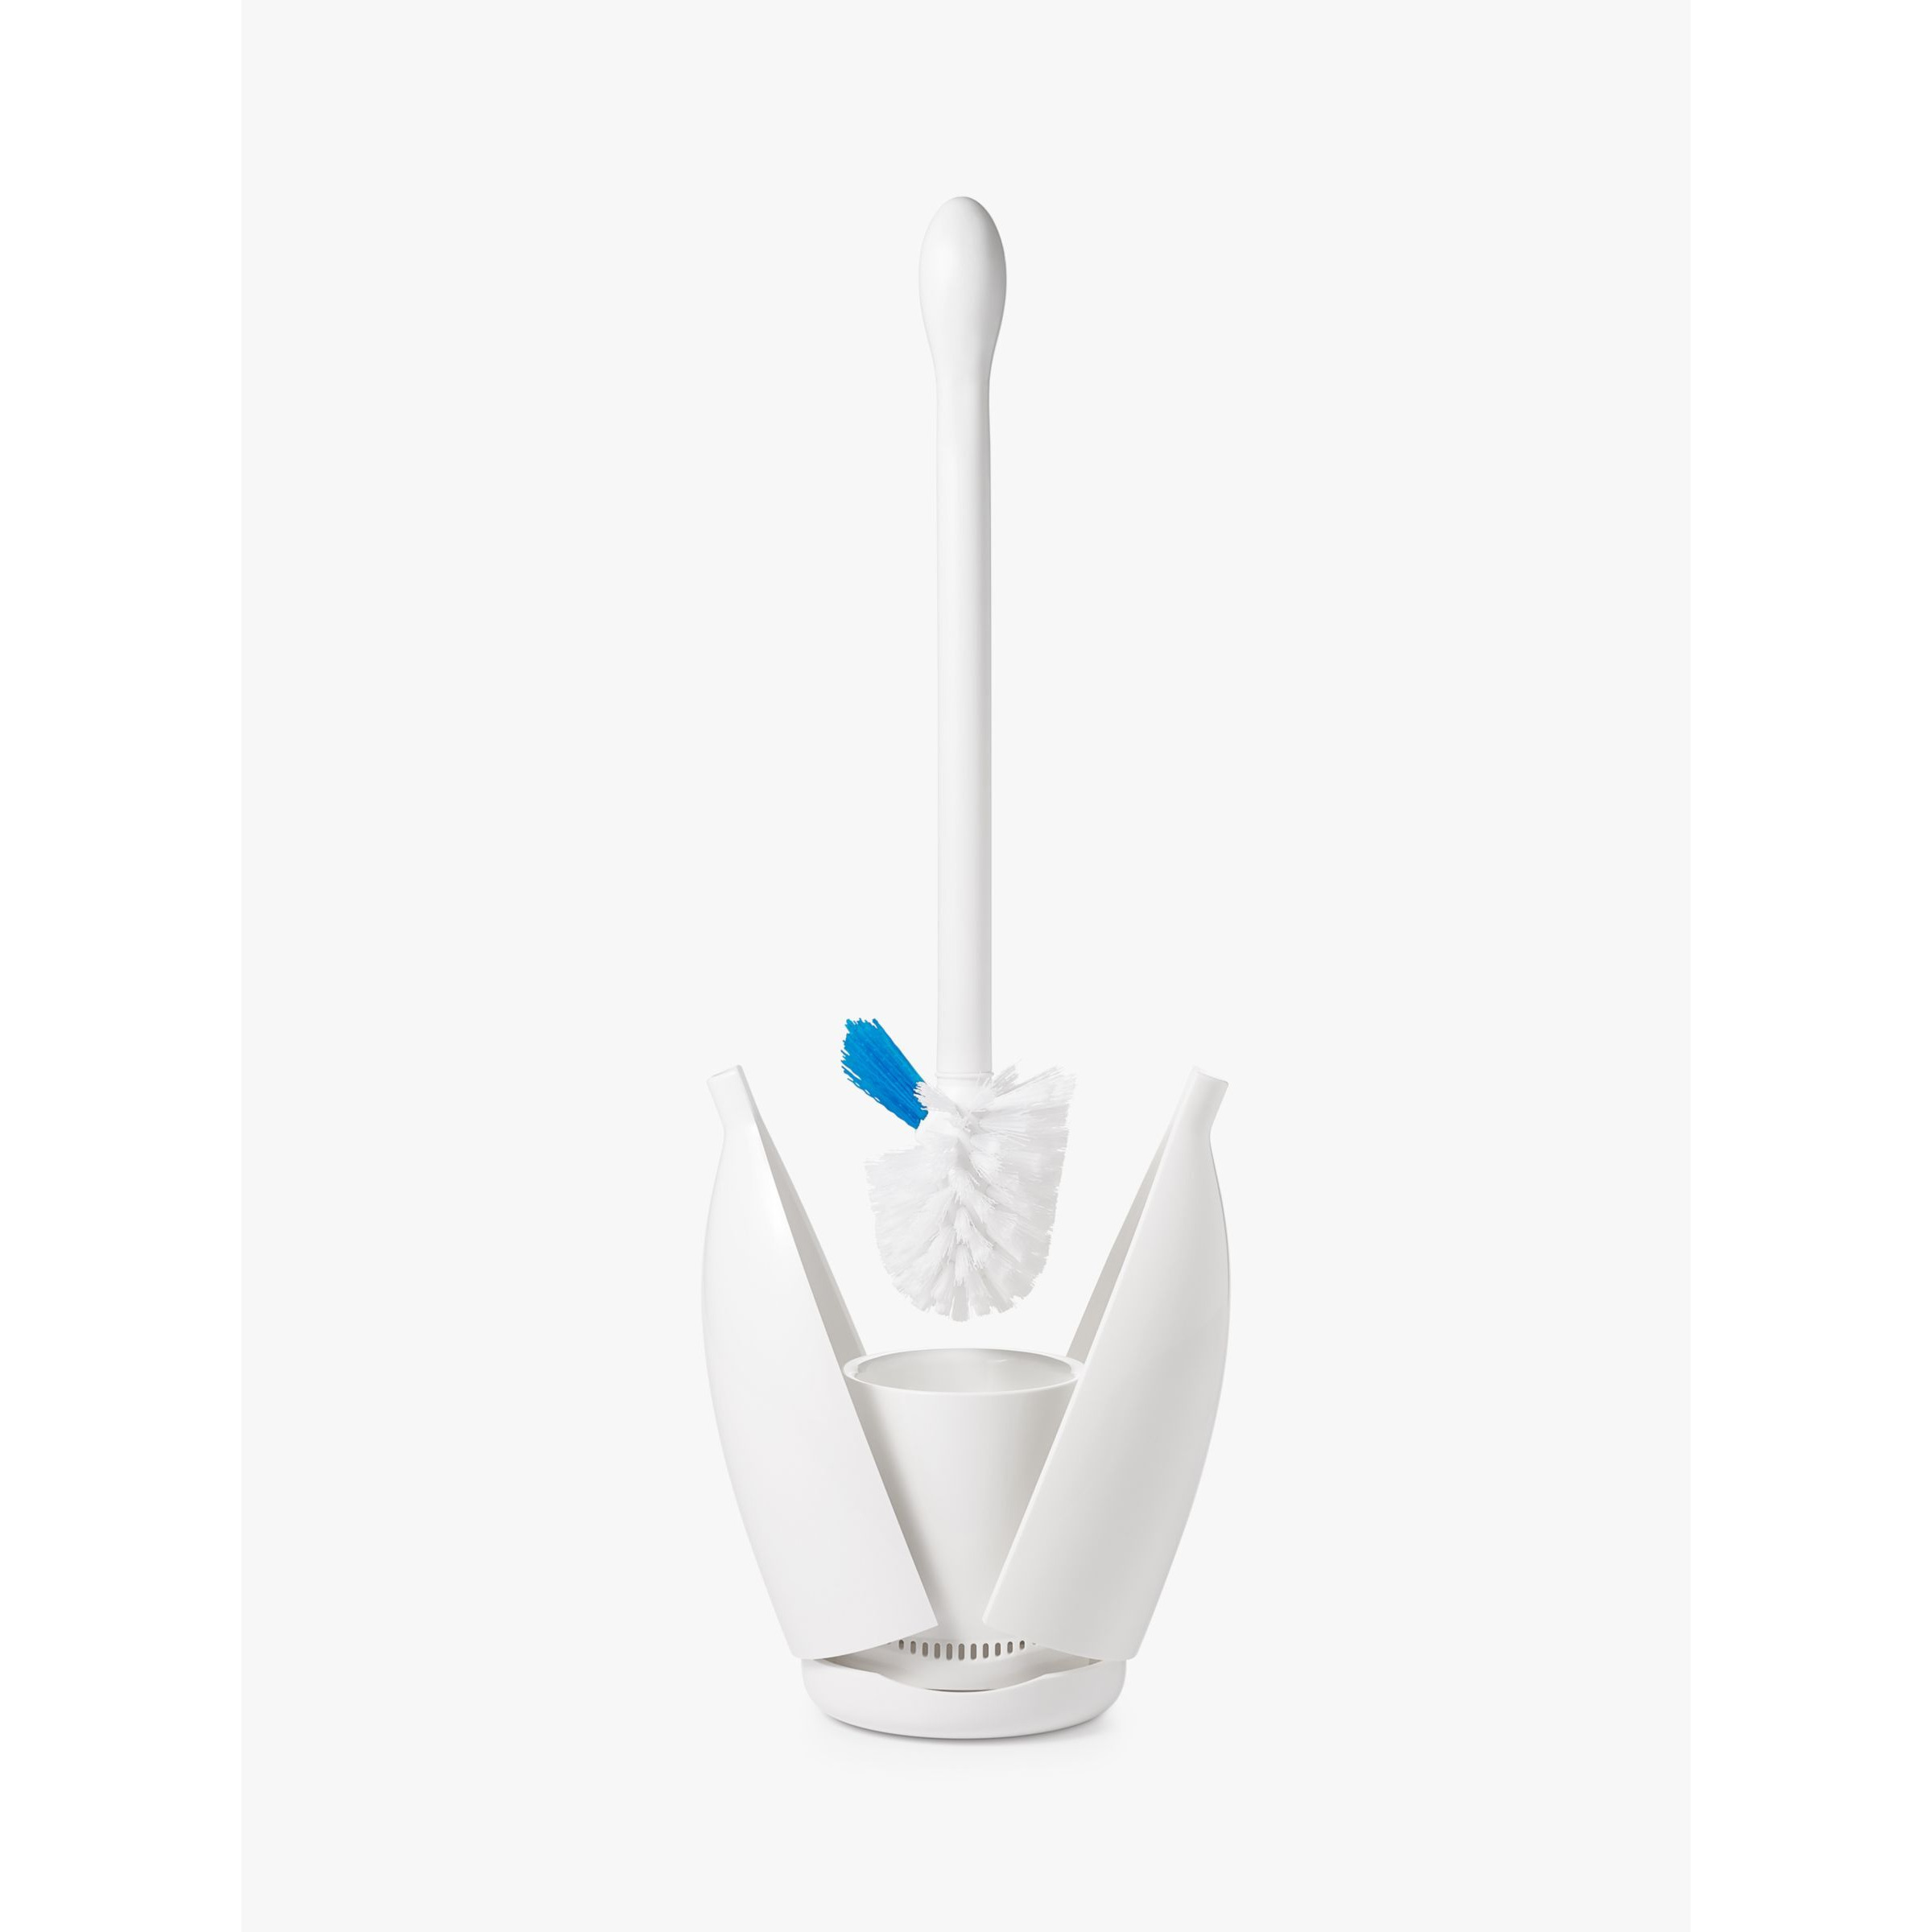 OXO Good Grips Toilet Brush With Rim Cleaner, White - image 1